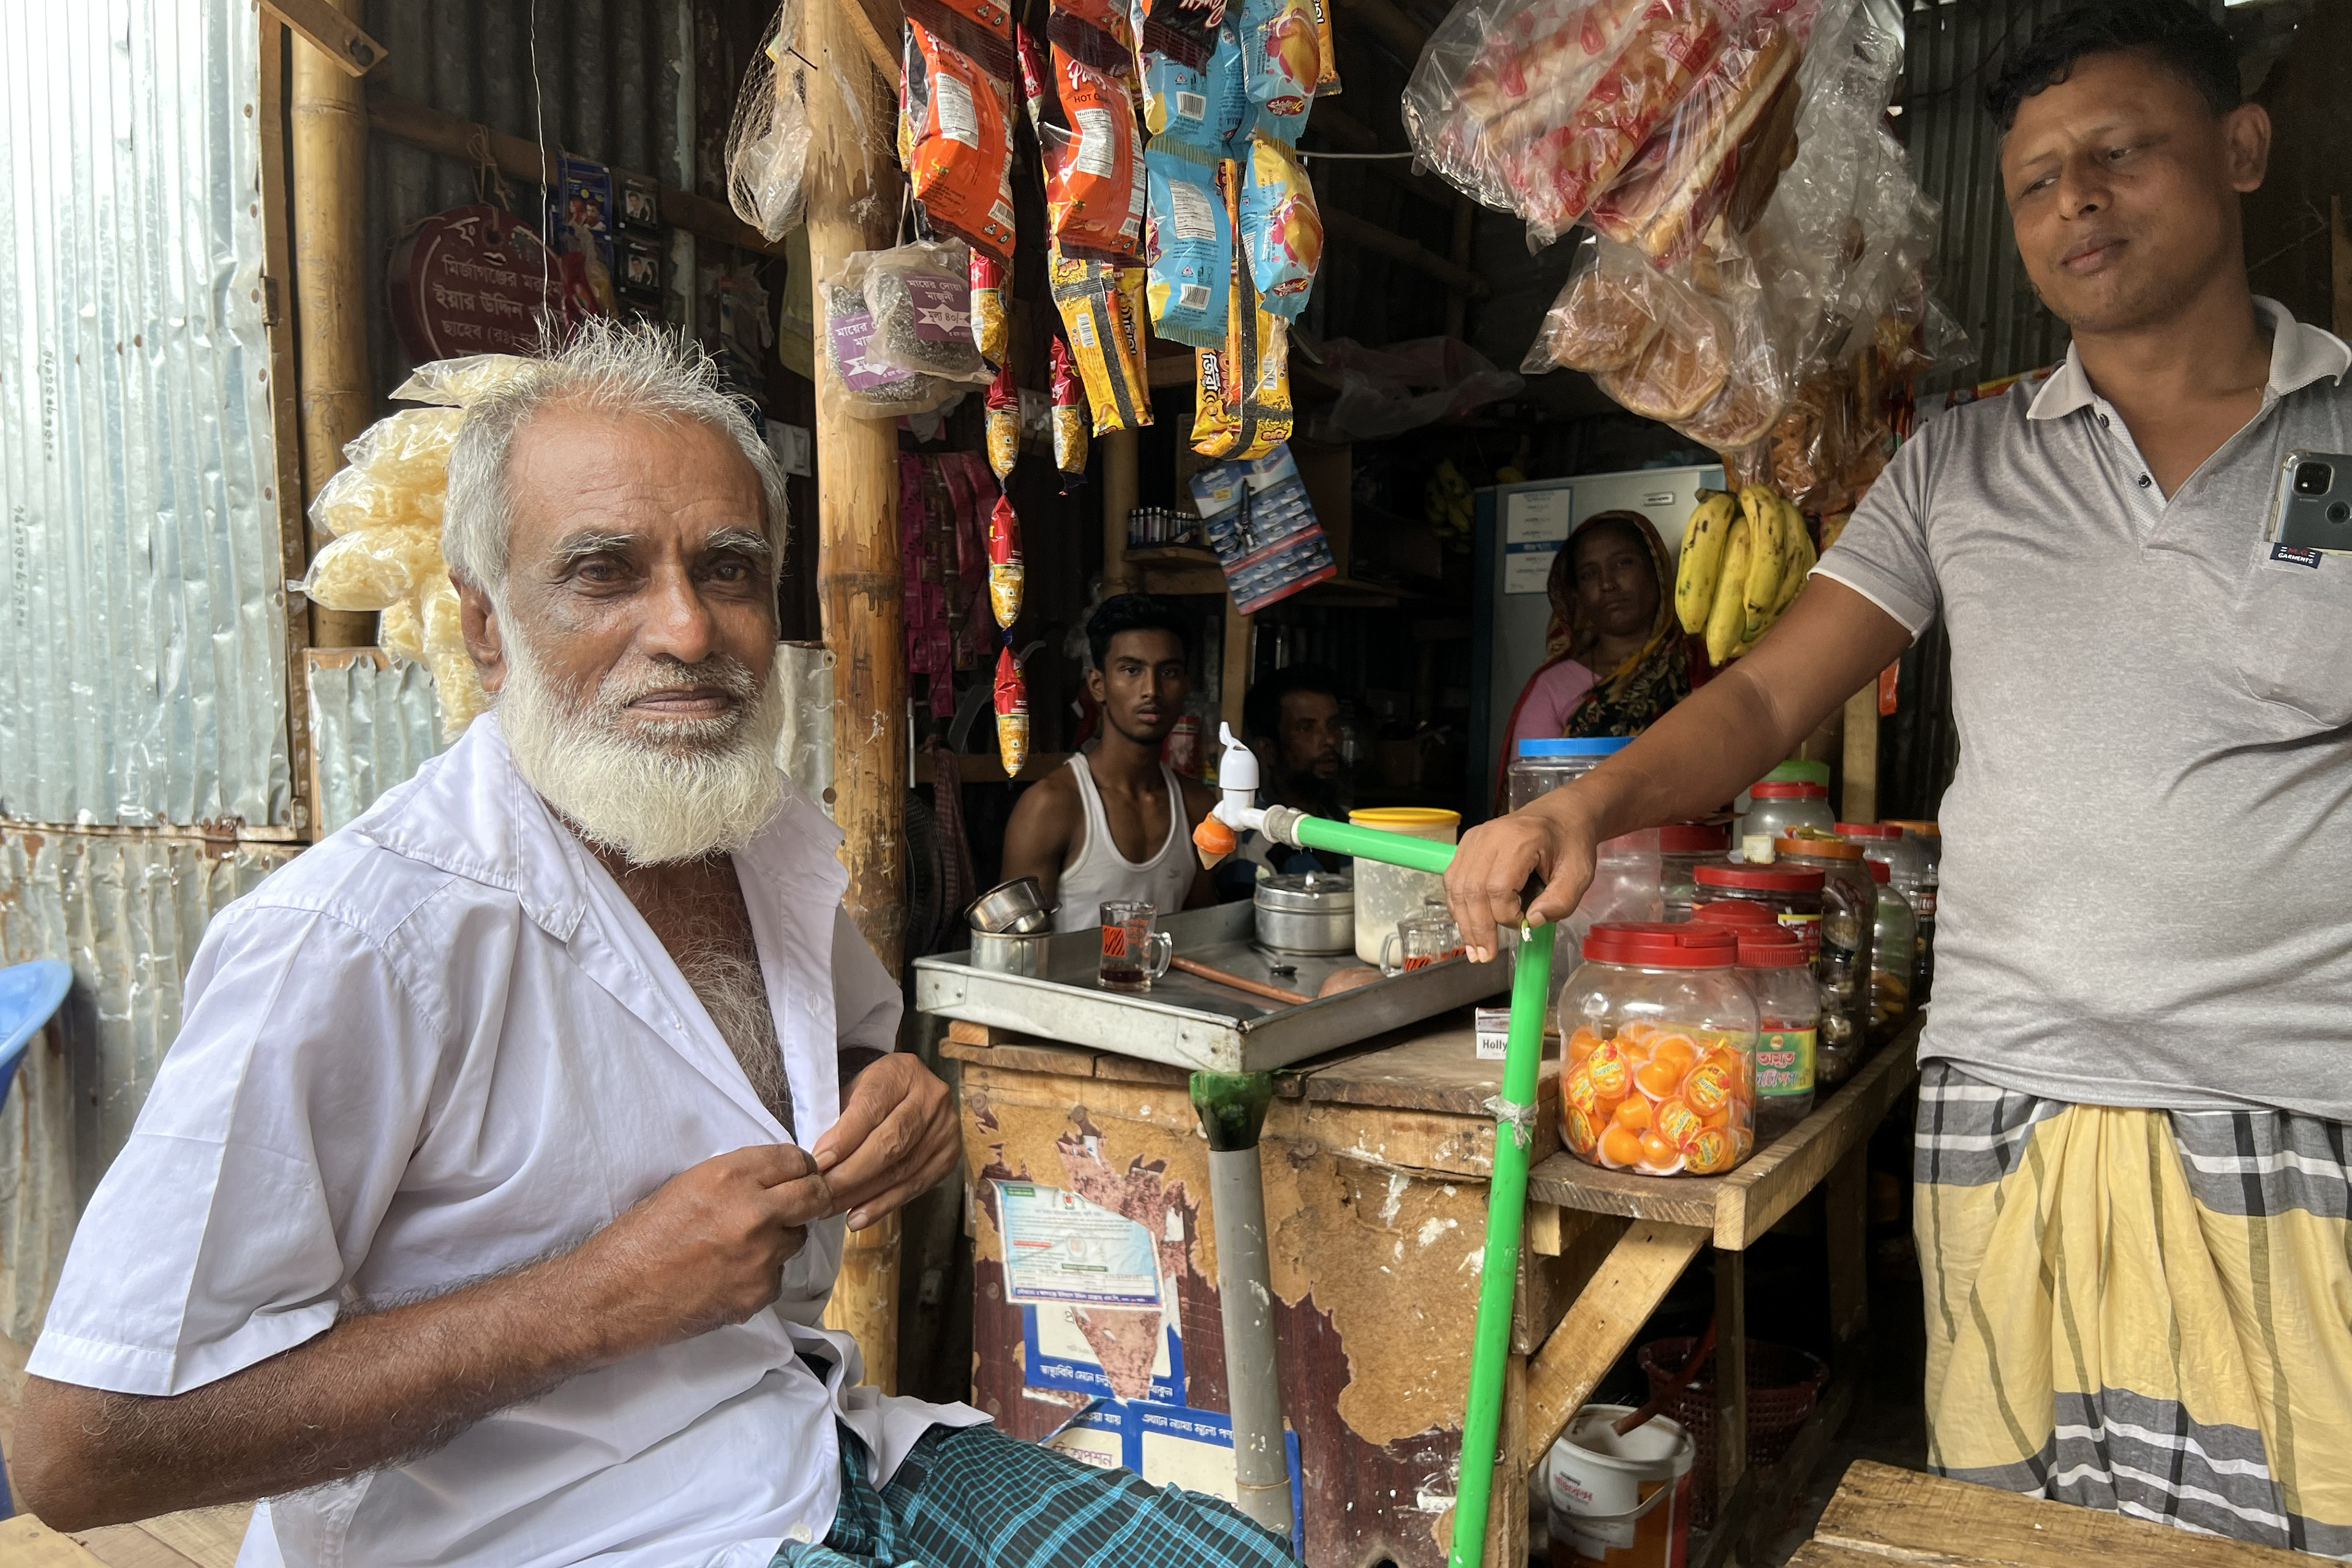 Shohrab, a man in his early 70s, sits outside of a tea stall on a well-worn wooden bench near his home in Dhaka. Inside the stall, a colorful display of snacks and sweets hang from the ceiling. Three other men and one woman are nearby in the tea stall.